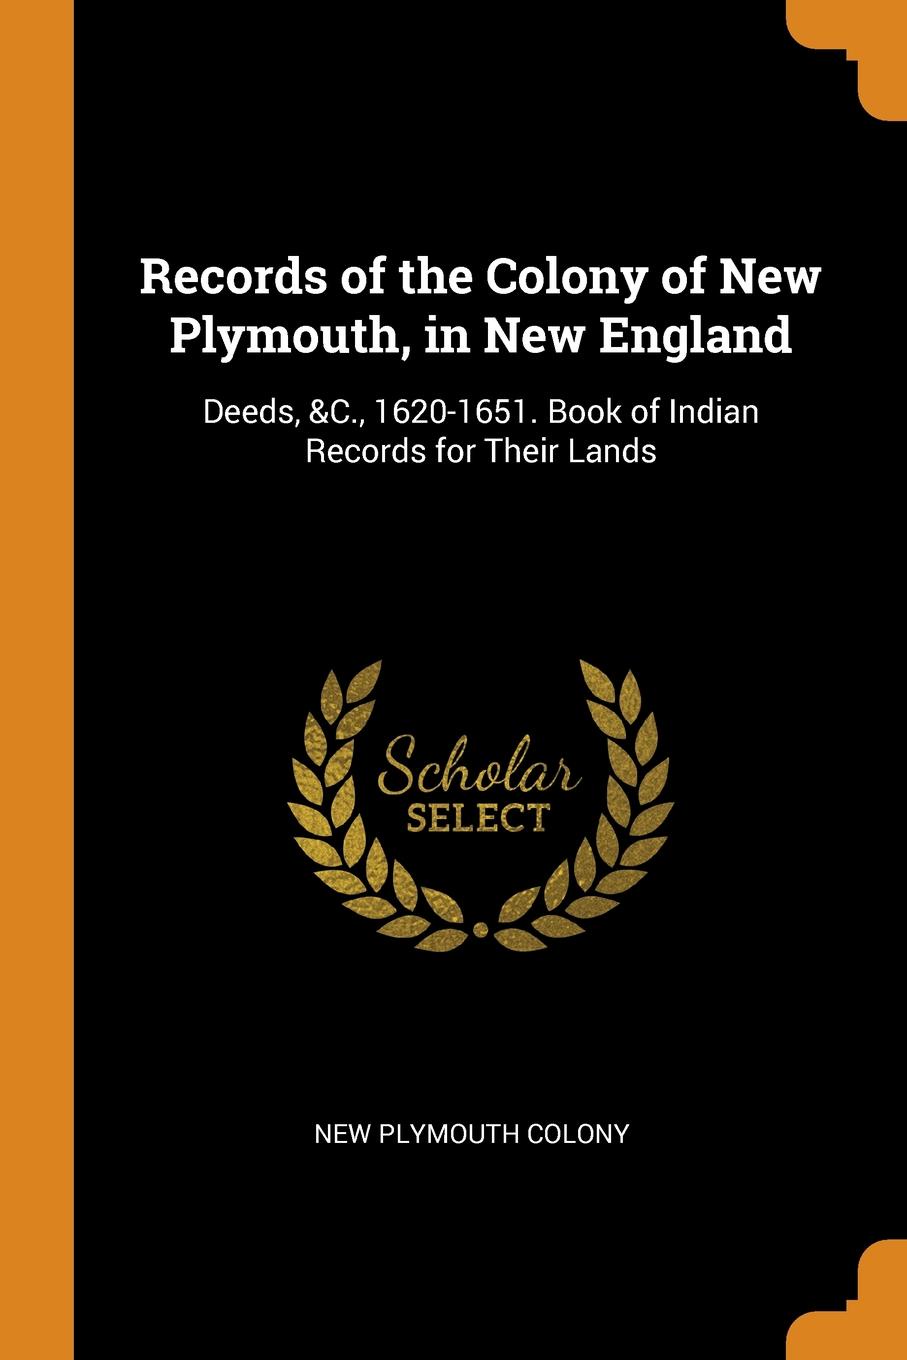 Records of the Colony of New Plymouth, in New England. Deeds, .C., 1620-1651. Book of Indian Records for Their Lands